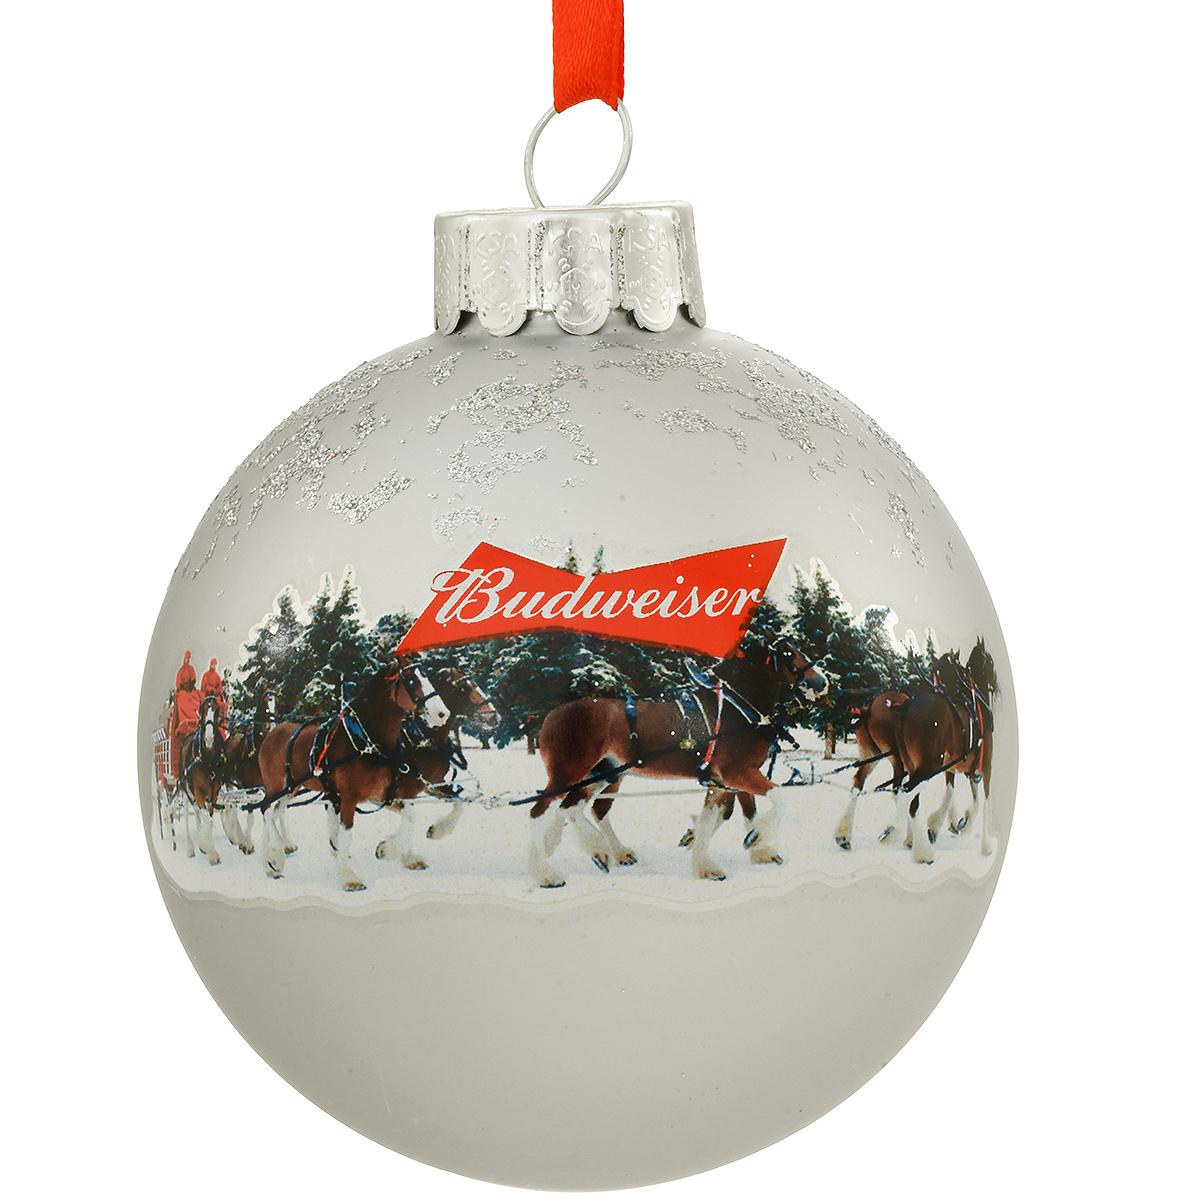 Budweiser Clydesdale Ornament